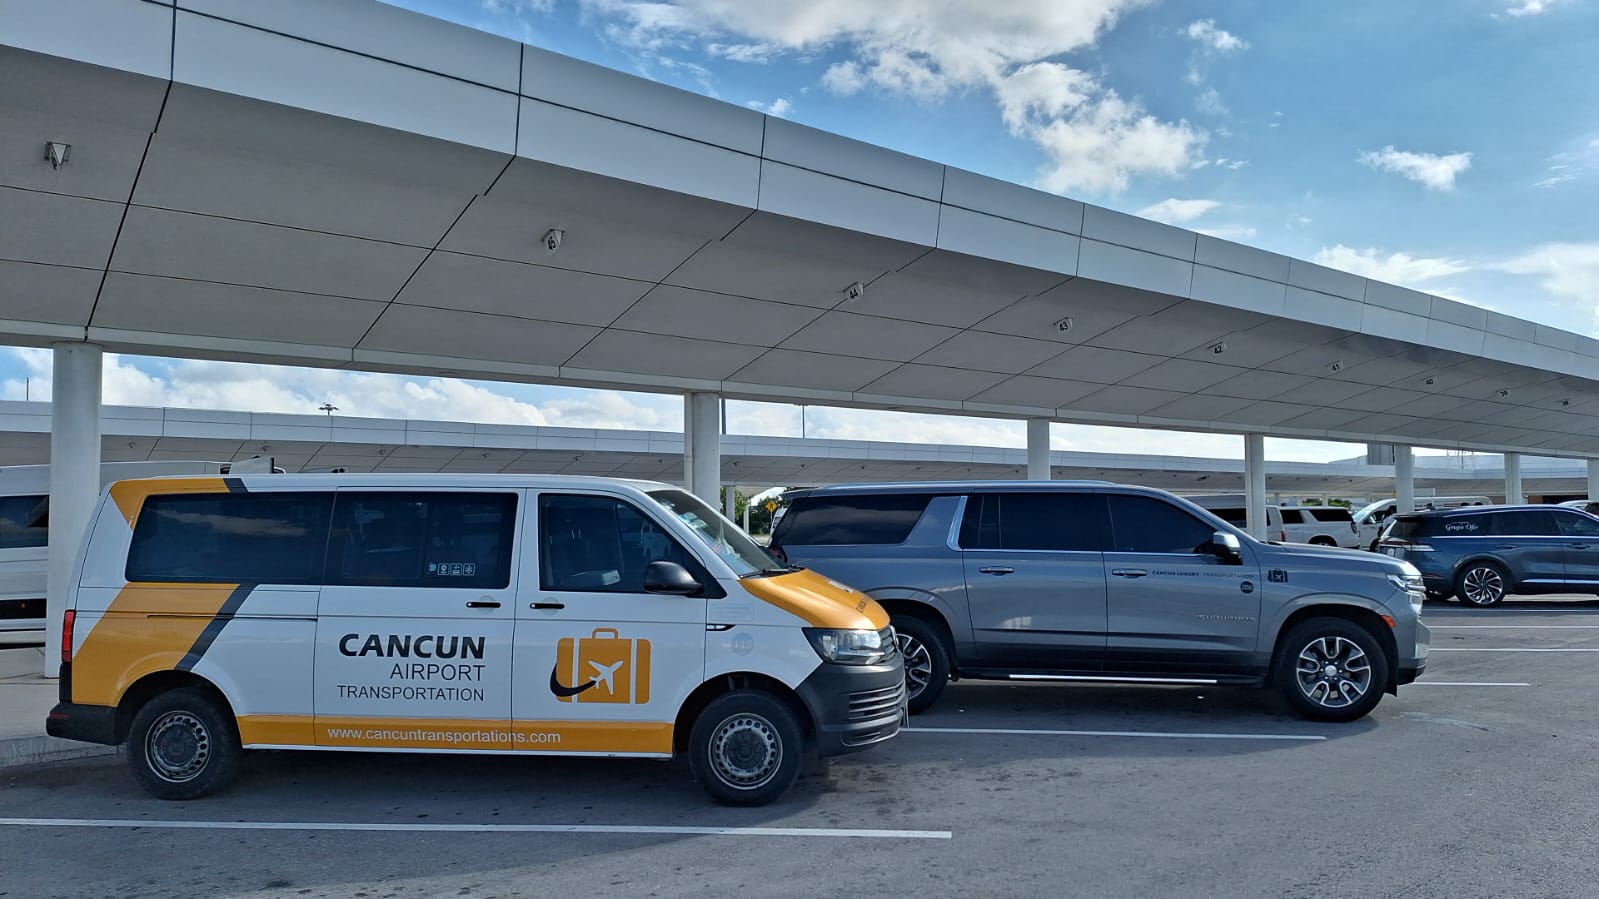 Cancun Airport Transportation and Cancun Luxury Transportation 